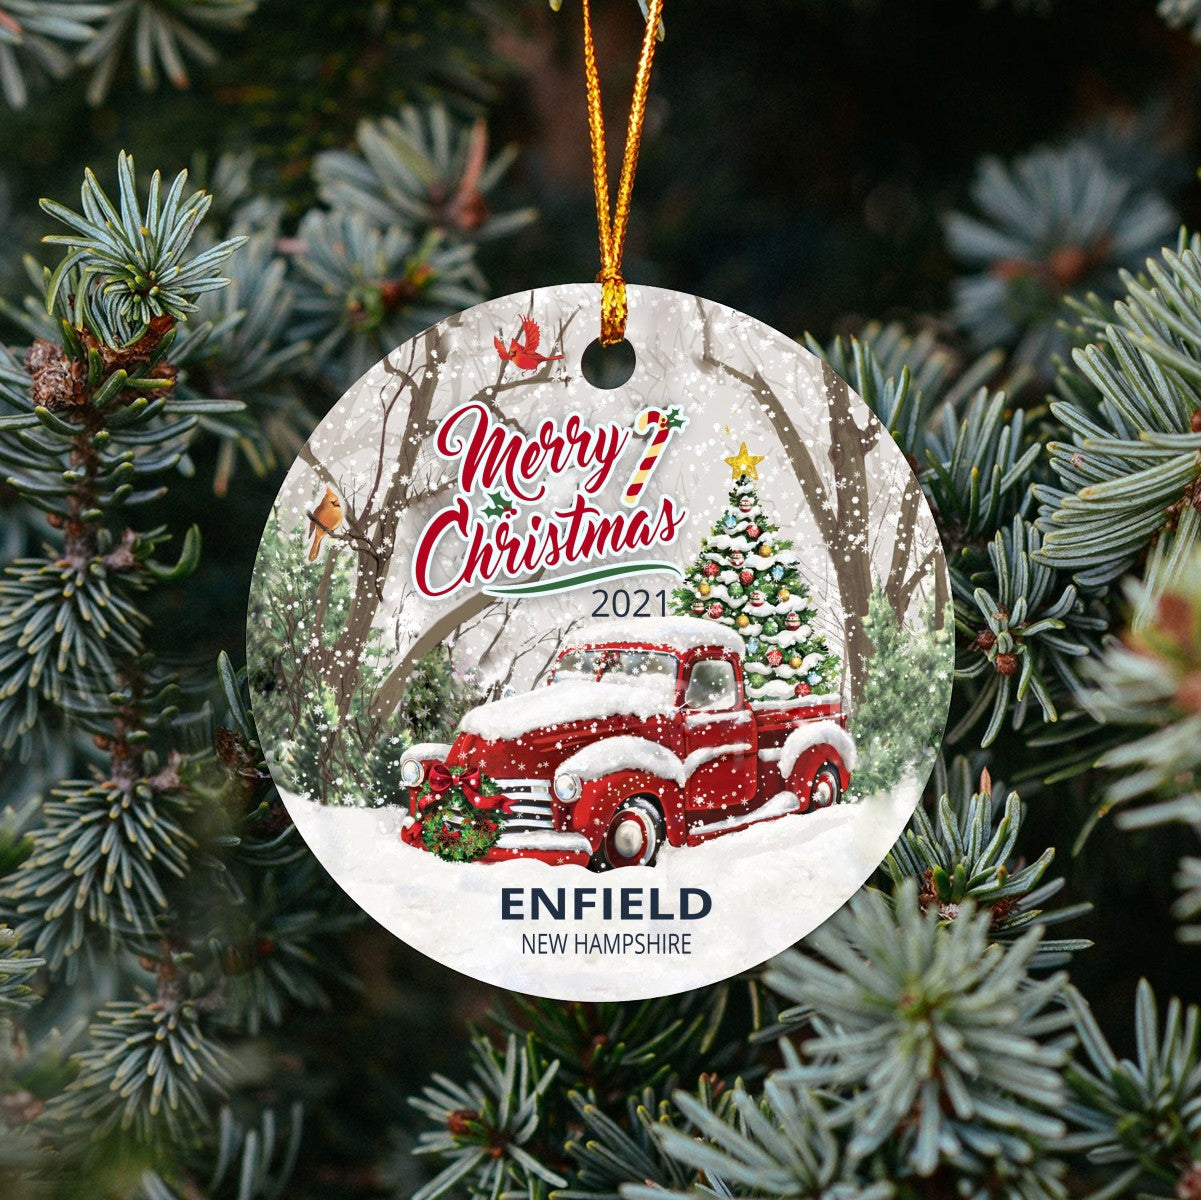 Christmas Tree Ornaments Enfield - Ornament Customize With Name City And State Enfield New Hampshire NH - Red Truck Xmas Ornaments 3'' Plastic Gift For Family, Friend And Housewarming